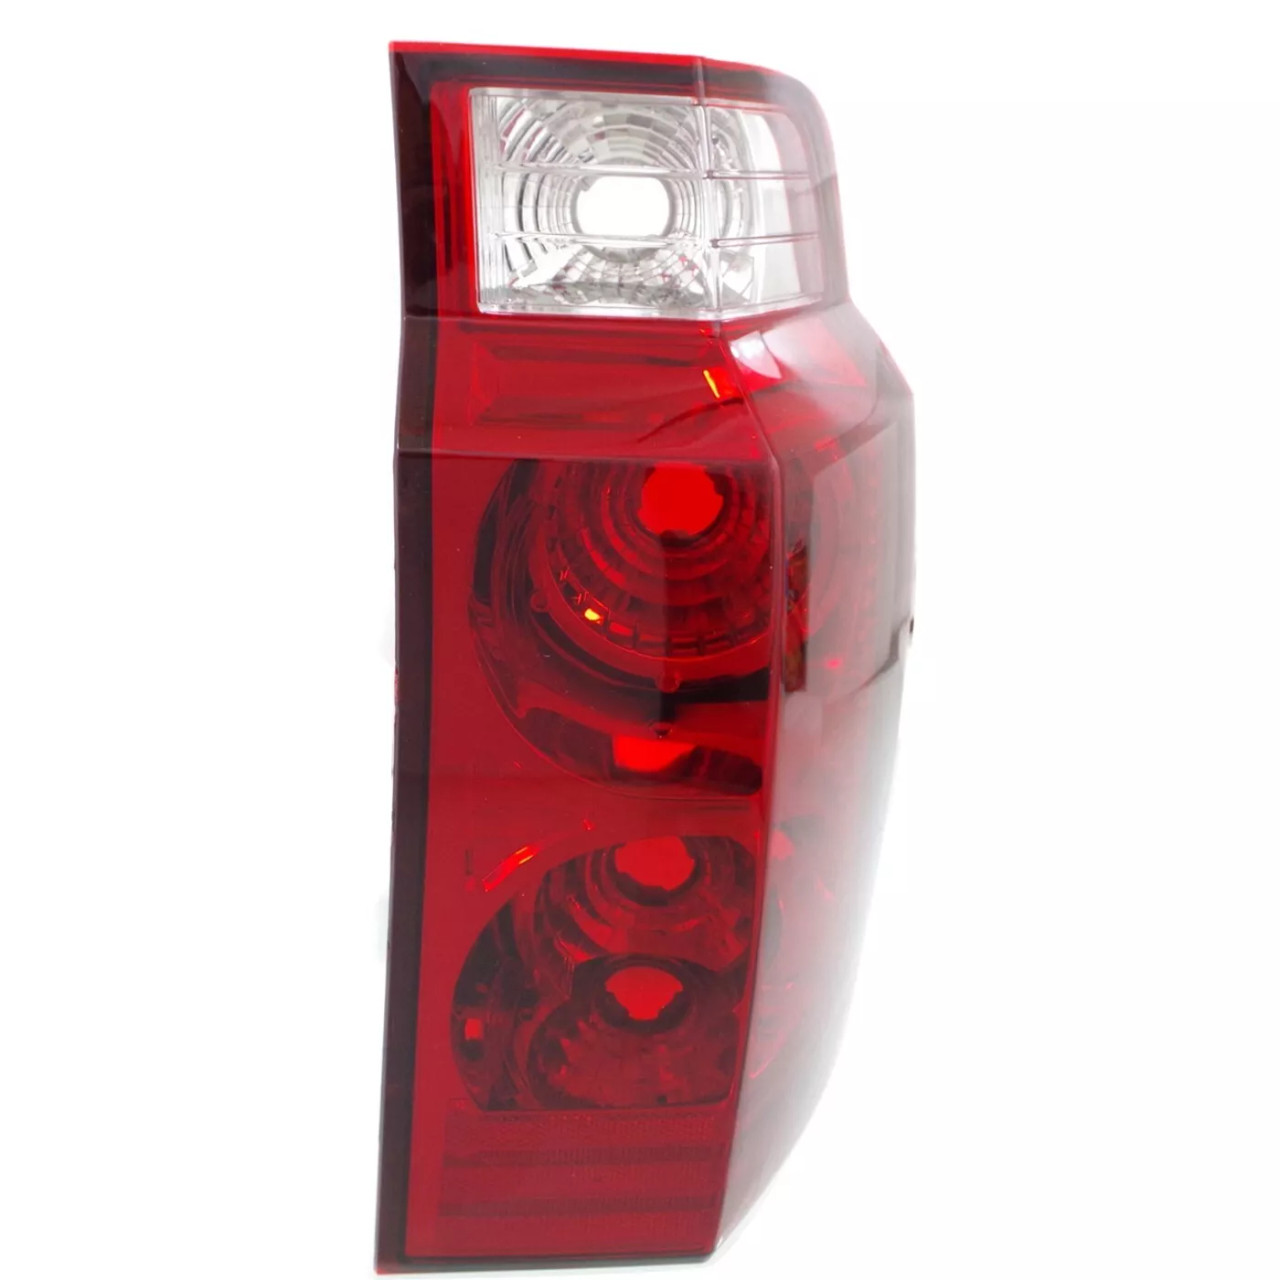 Set of 2 Tail Light For 2006-2007 Jeep Commander LH & RH